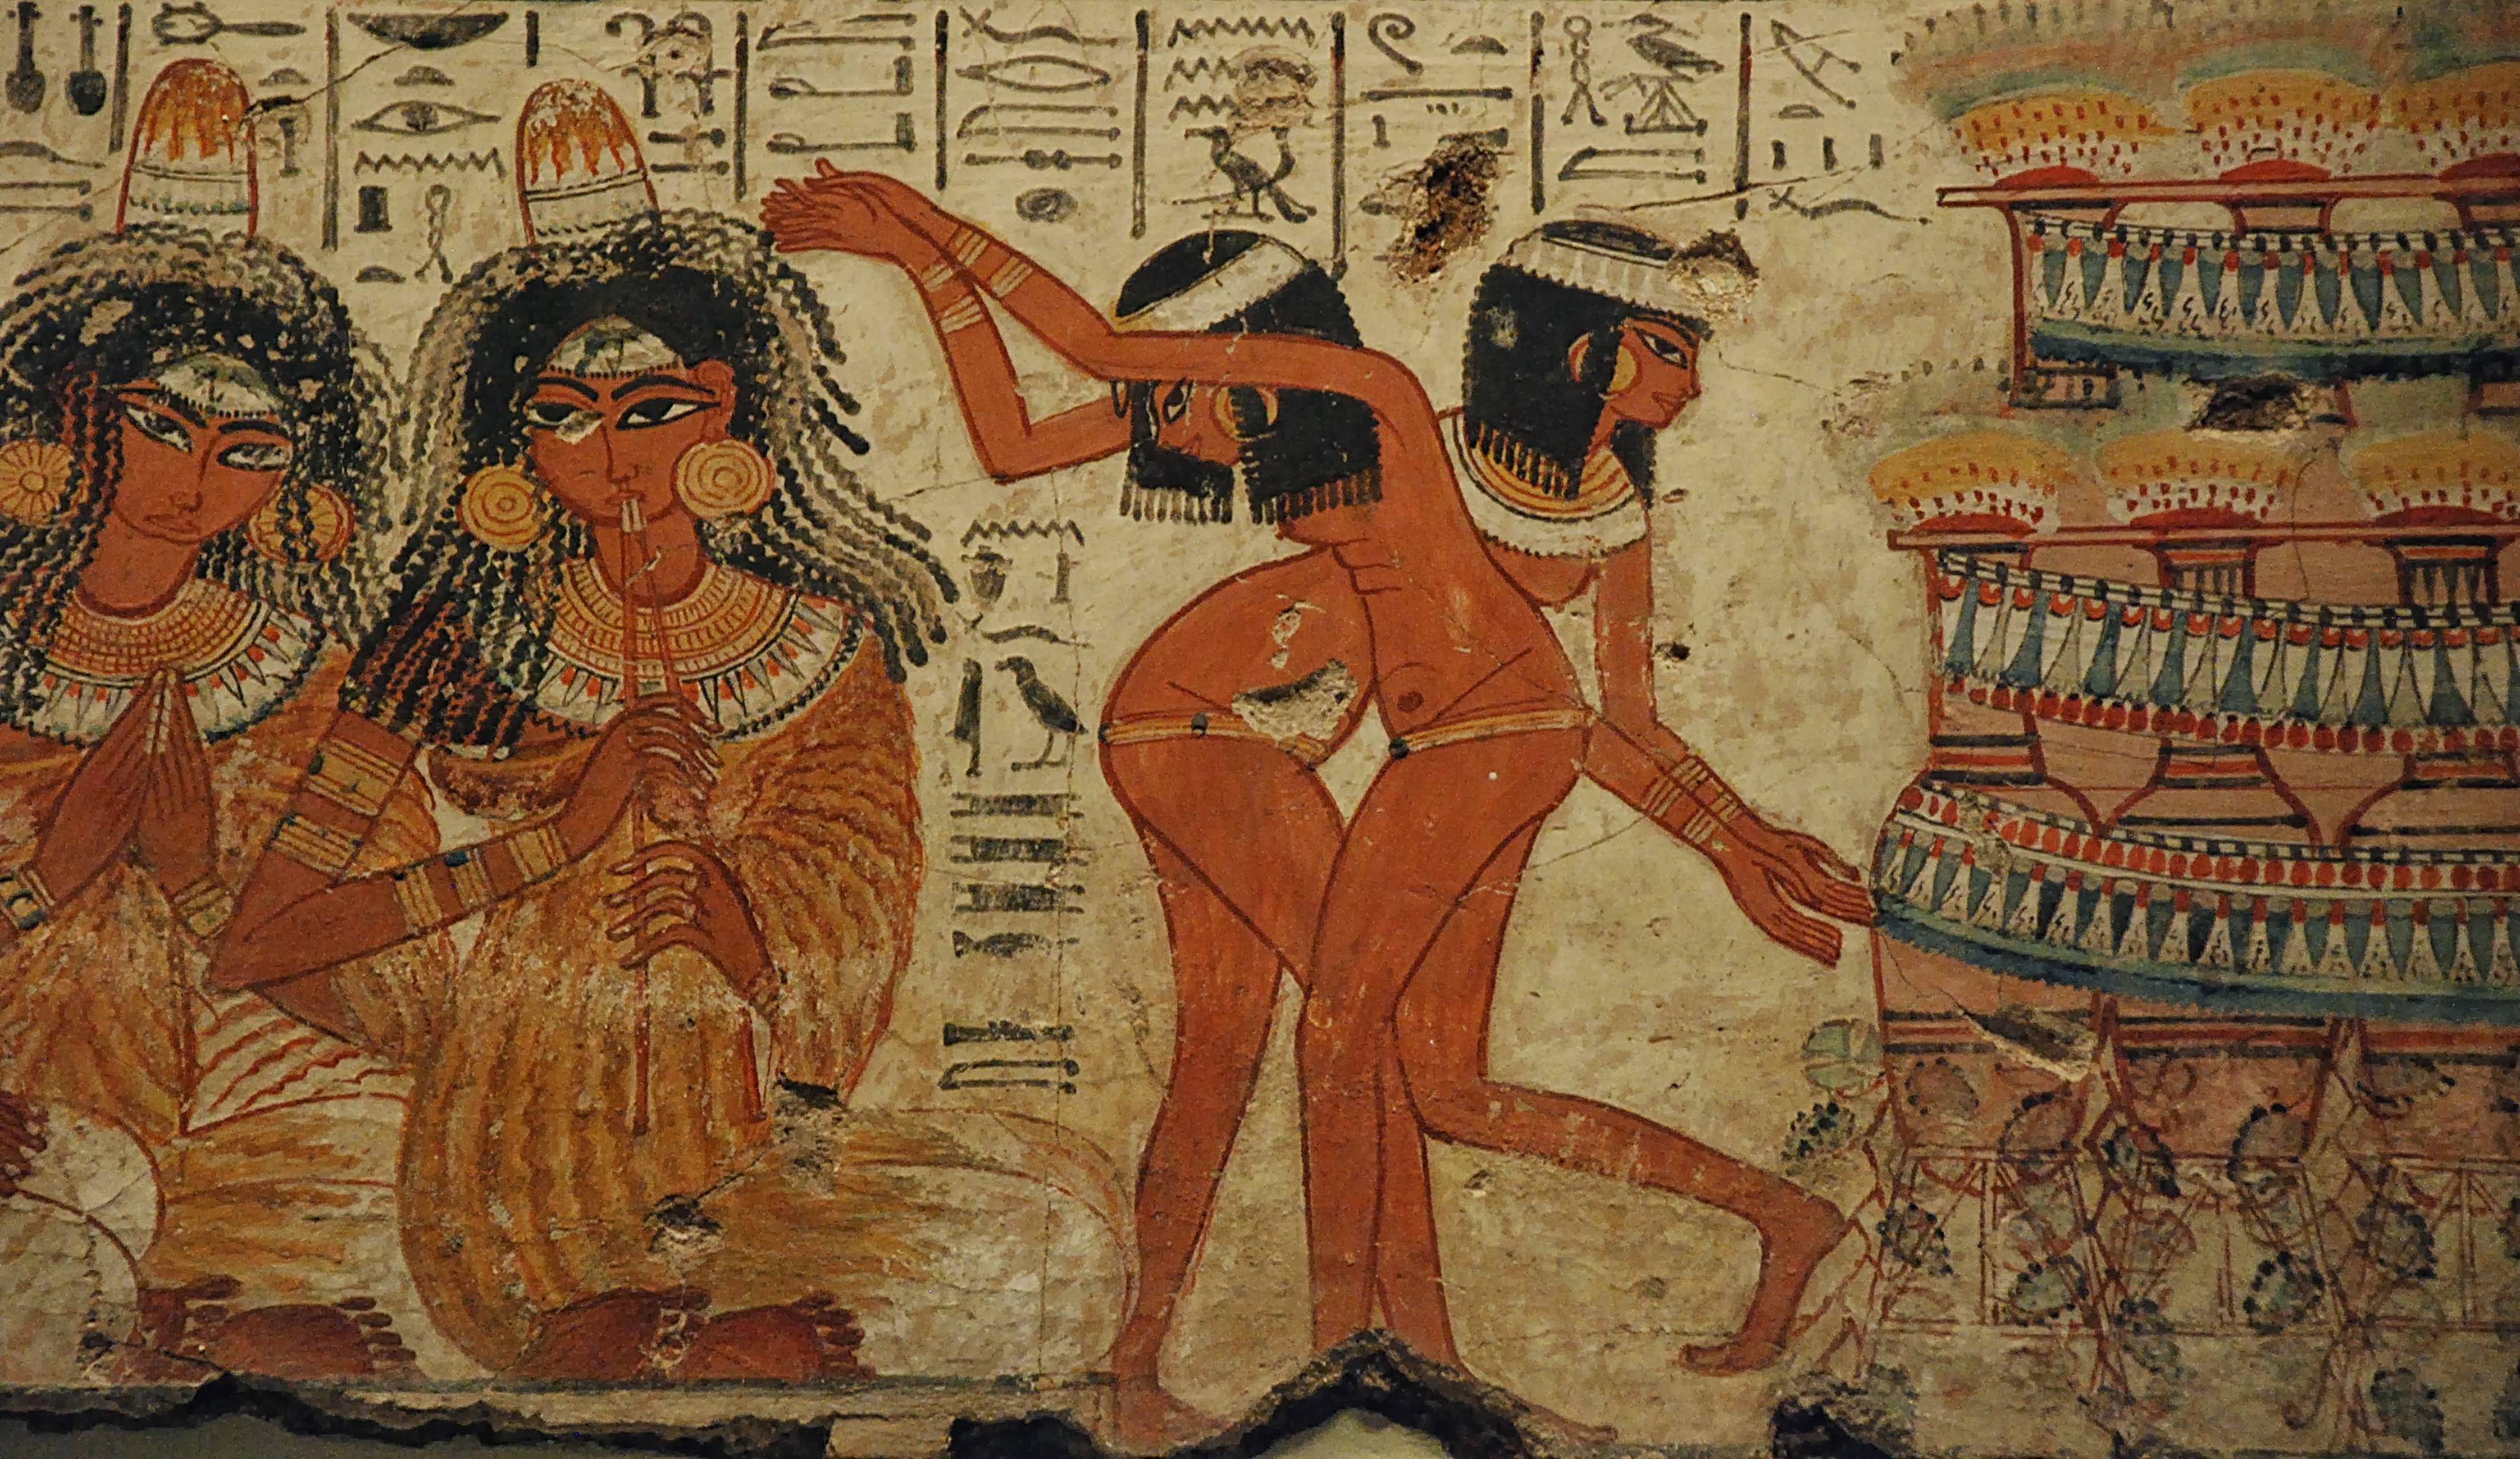 What is a major characteristic of ancient Egyptian art?